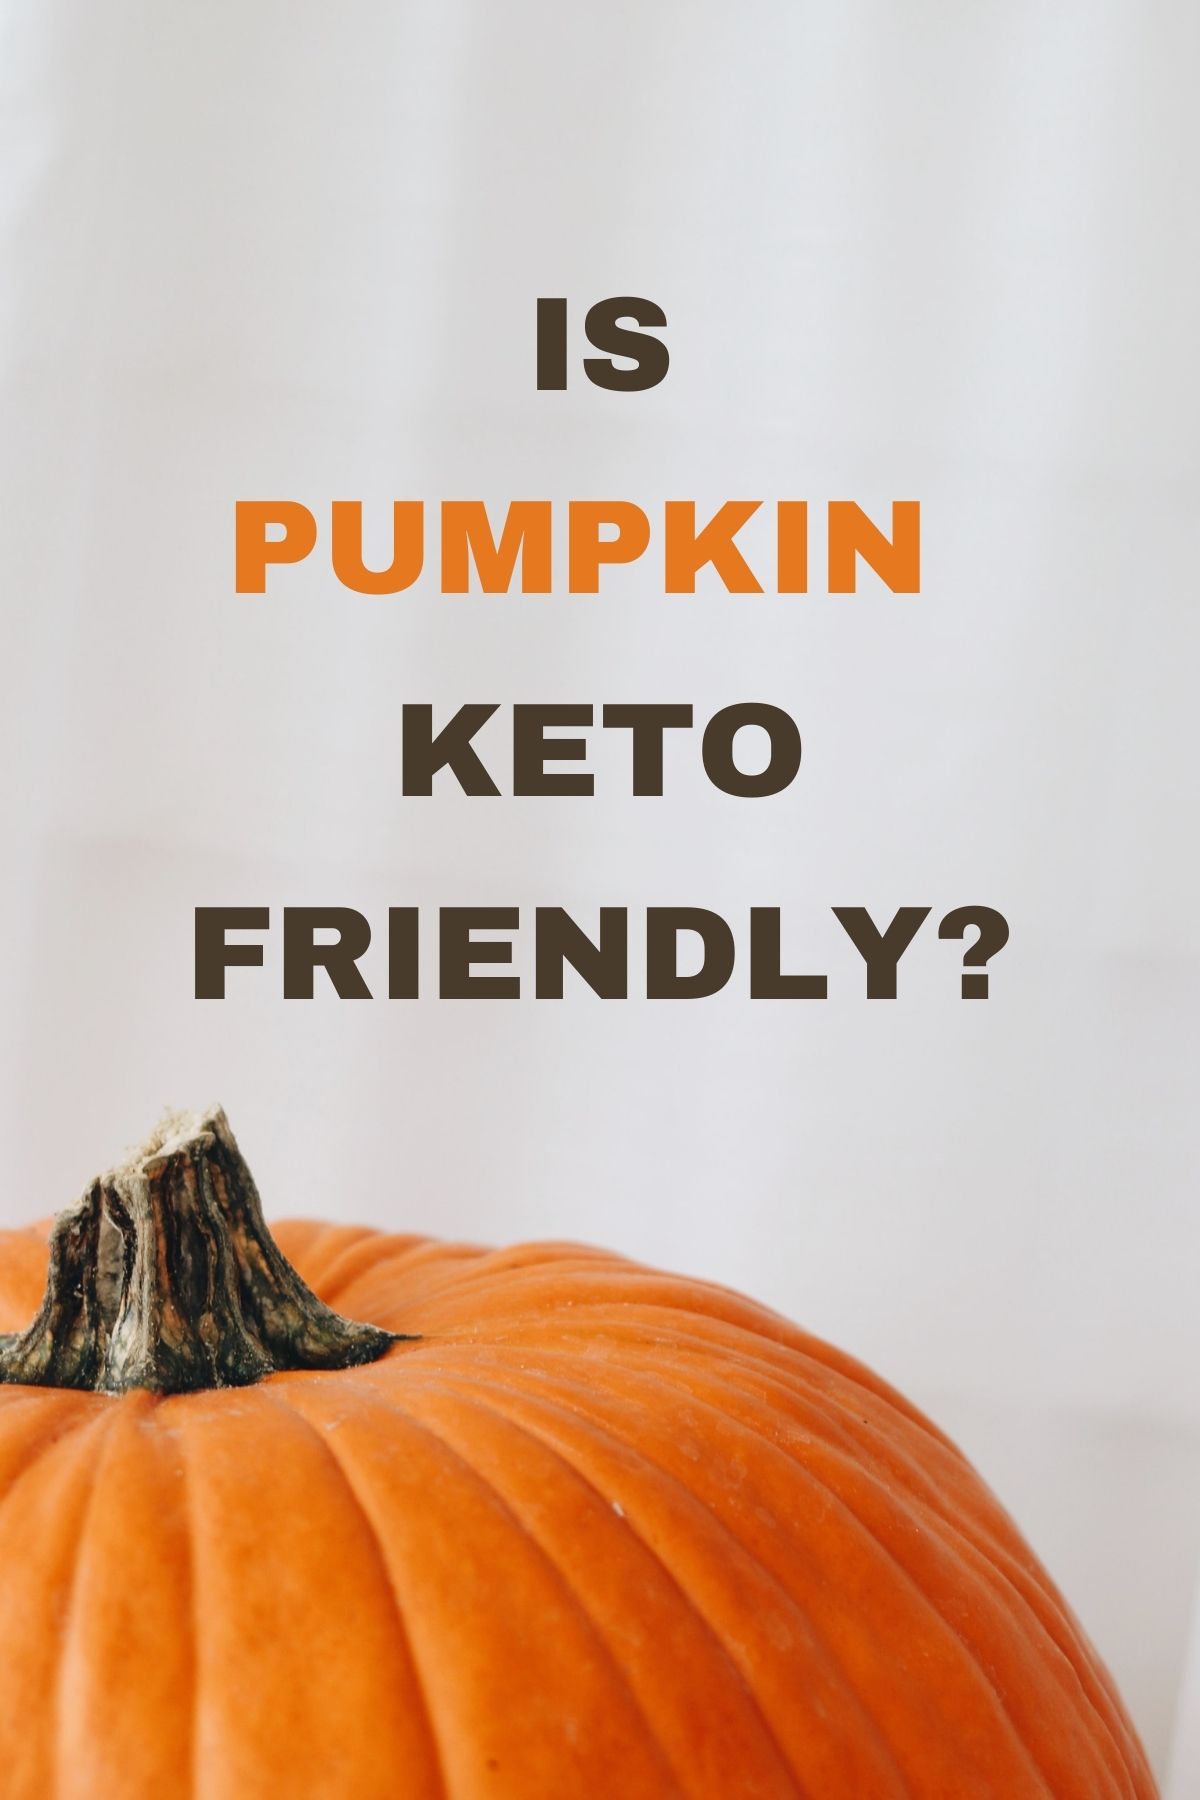 image of a pumpkin with the text is pumpkin keto friendly